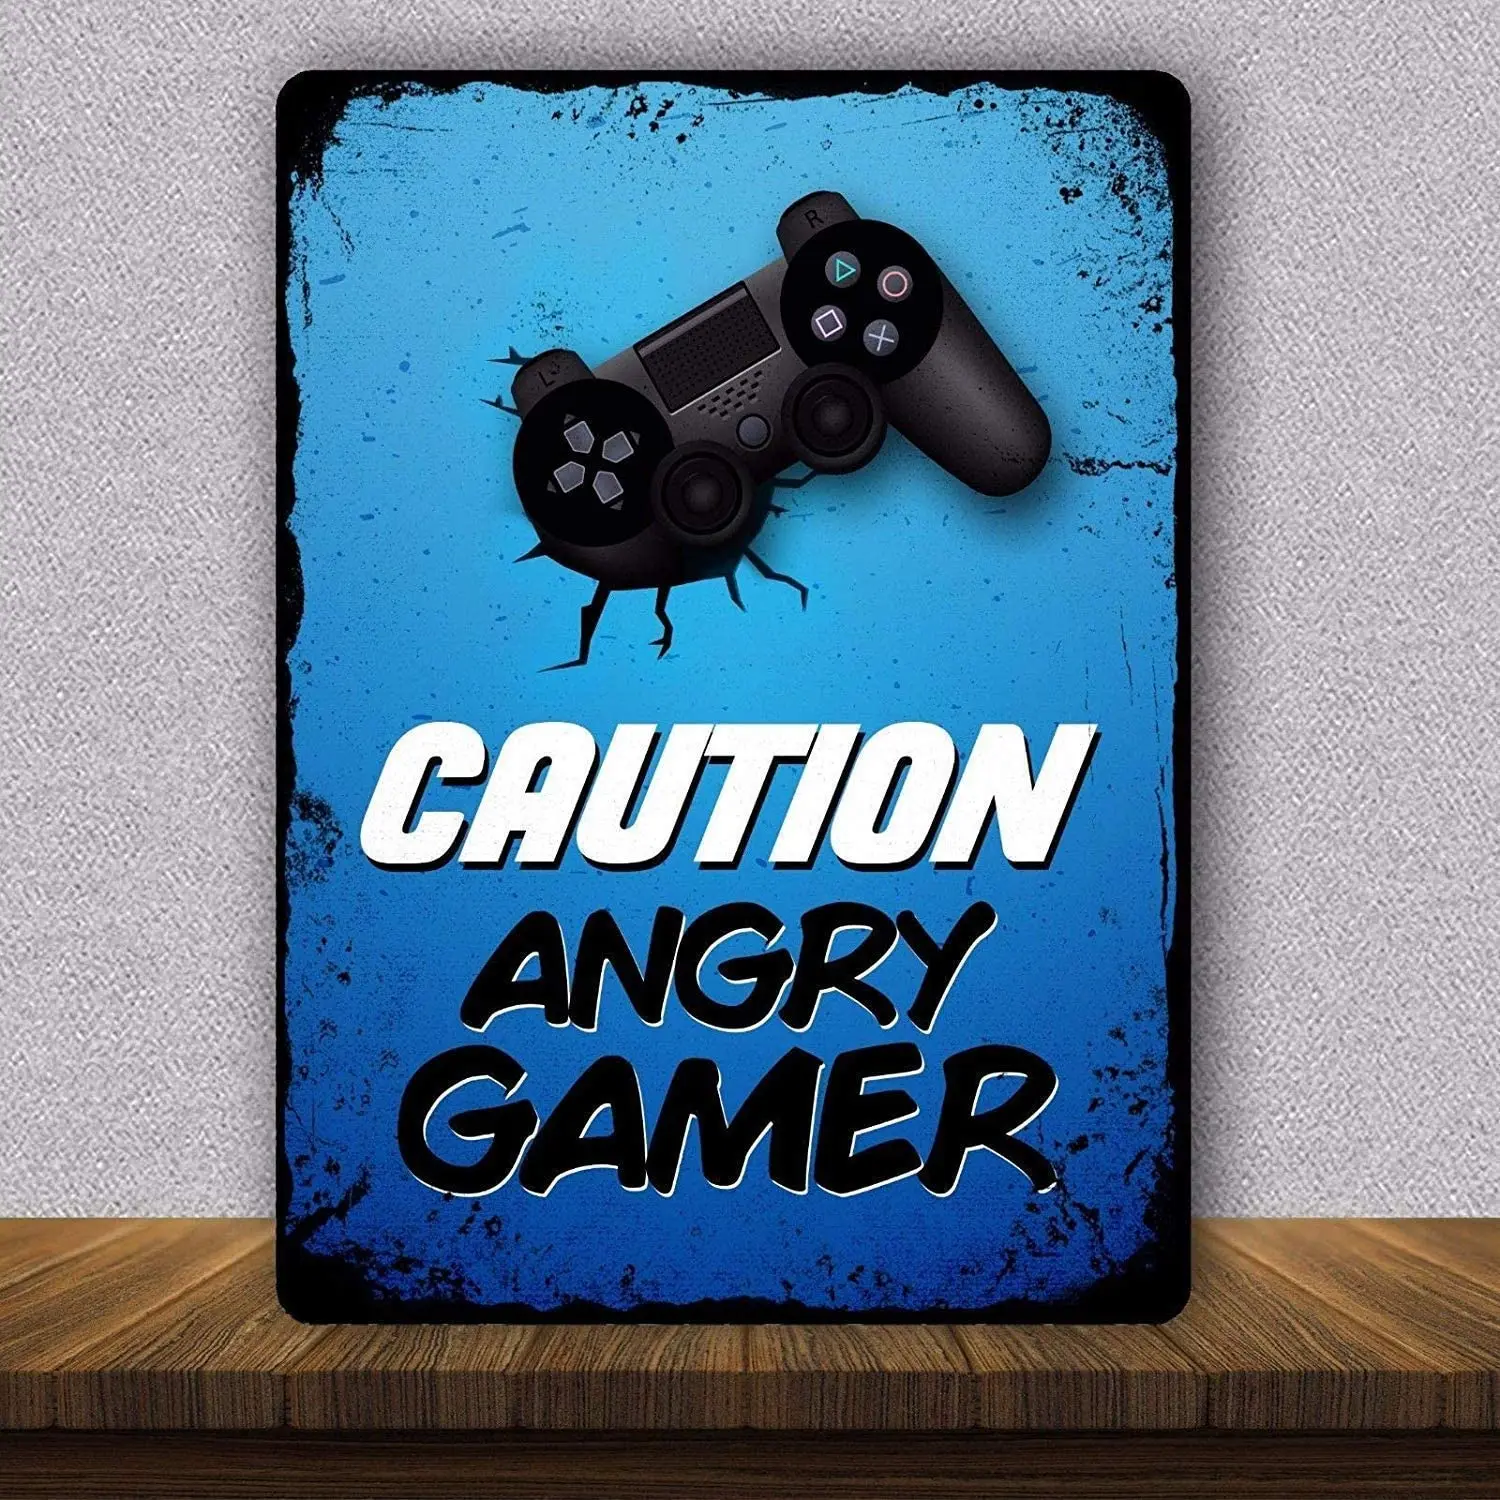 

LANK Tin Signs 12x8 Inches Caution Angry Gamer Vintage Wall Decor Funny Tin Sign, Novelty Gifts, Kitchen Wall Art, Coffee, Bar